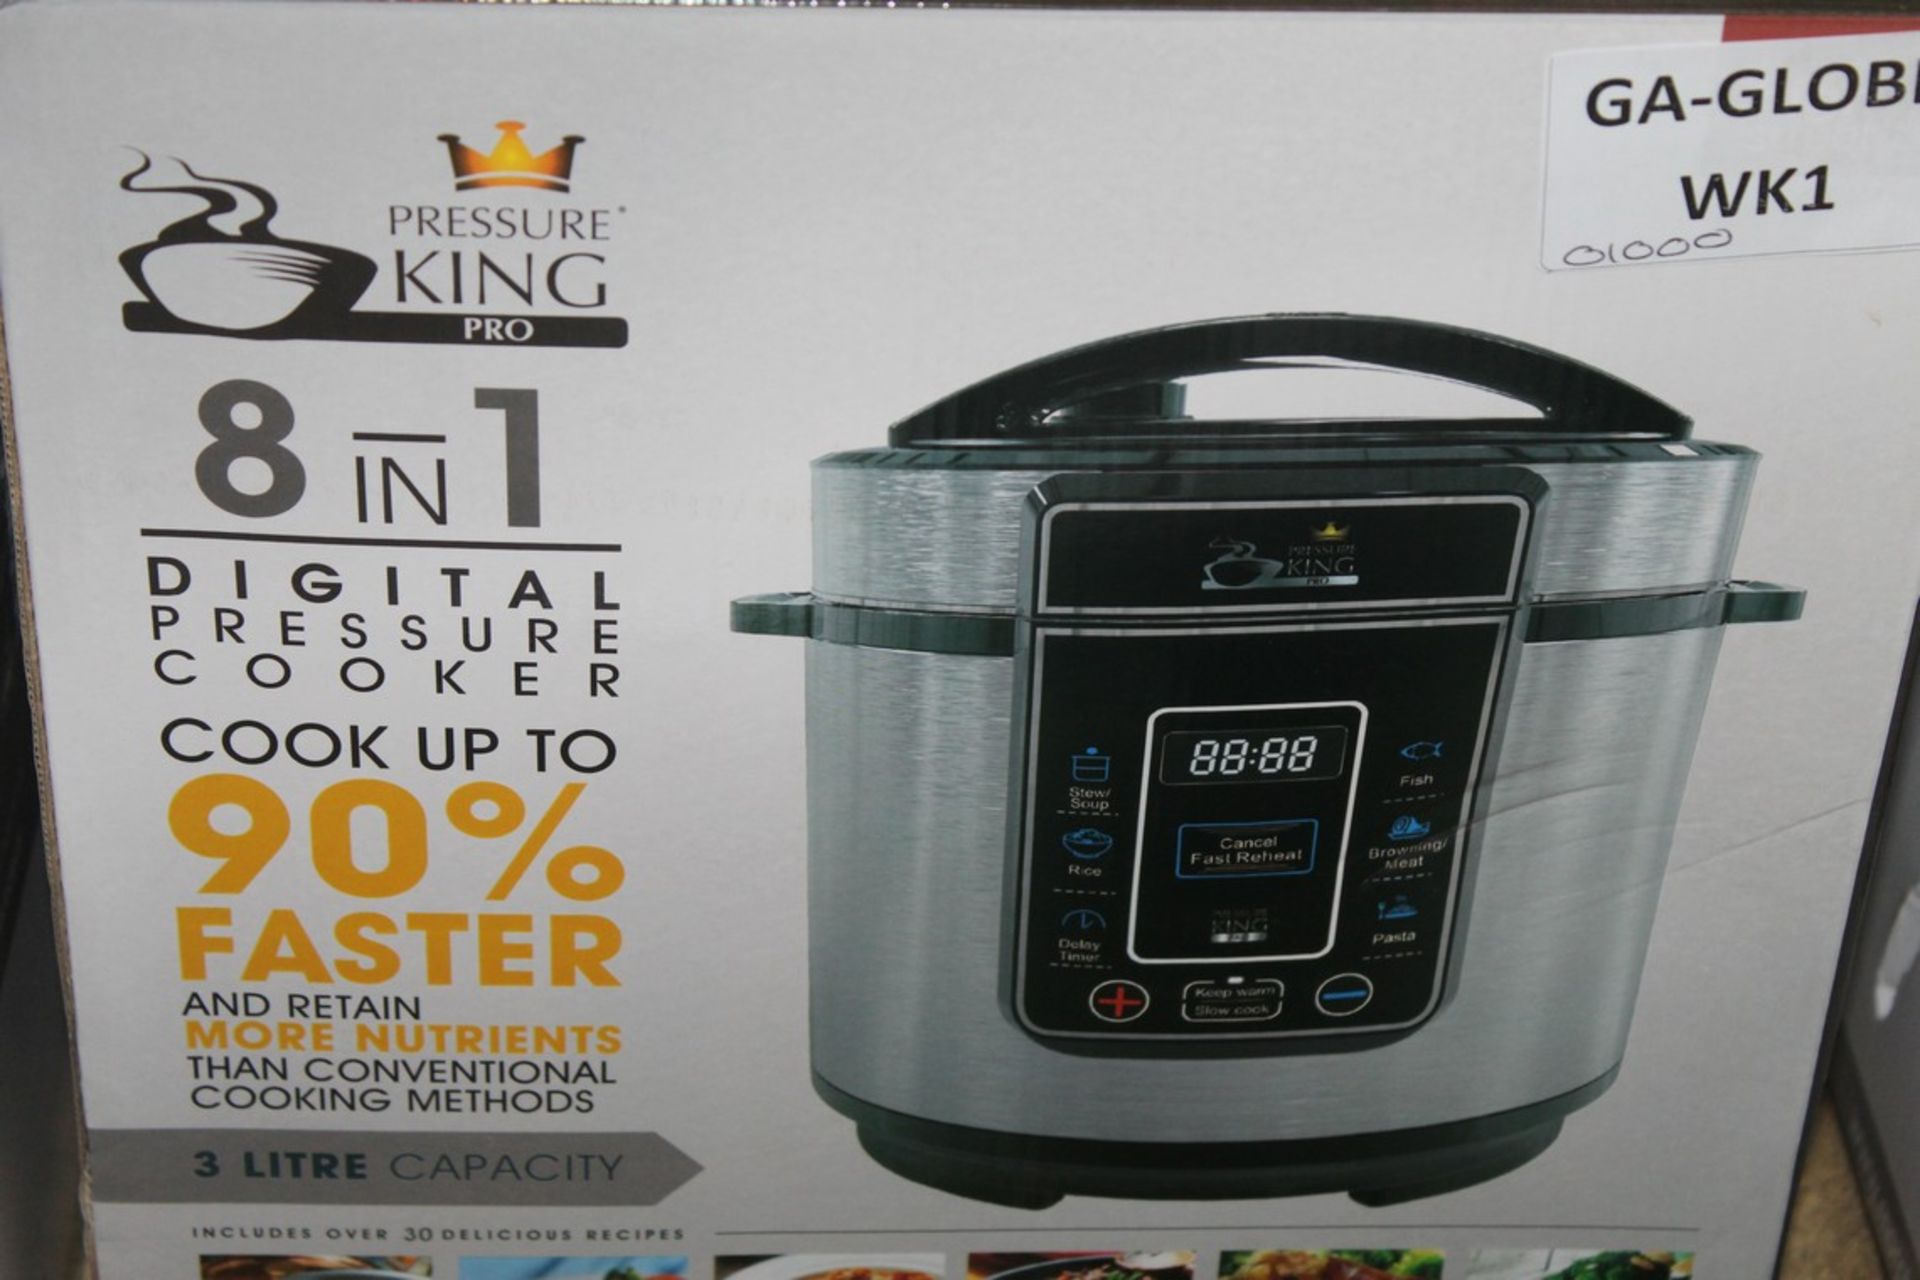 Boxed 8 In 1 Pressure King Pro Cooker RRP £75 (Untested Customer Returns) (Public Viewing and